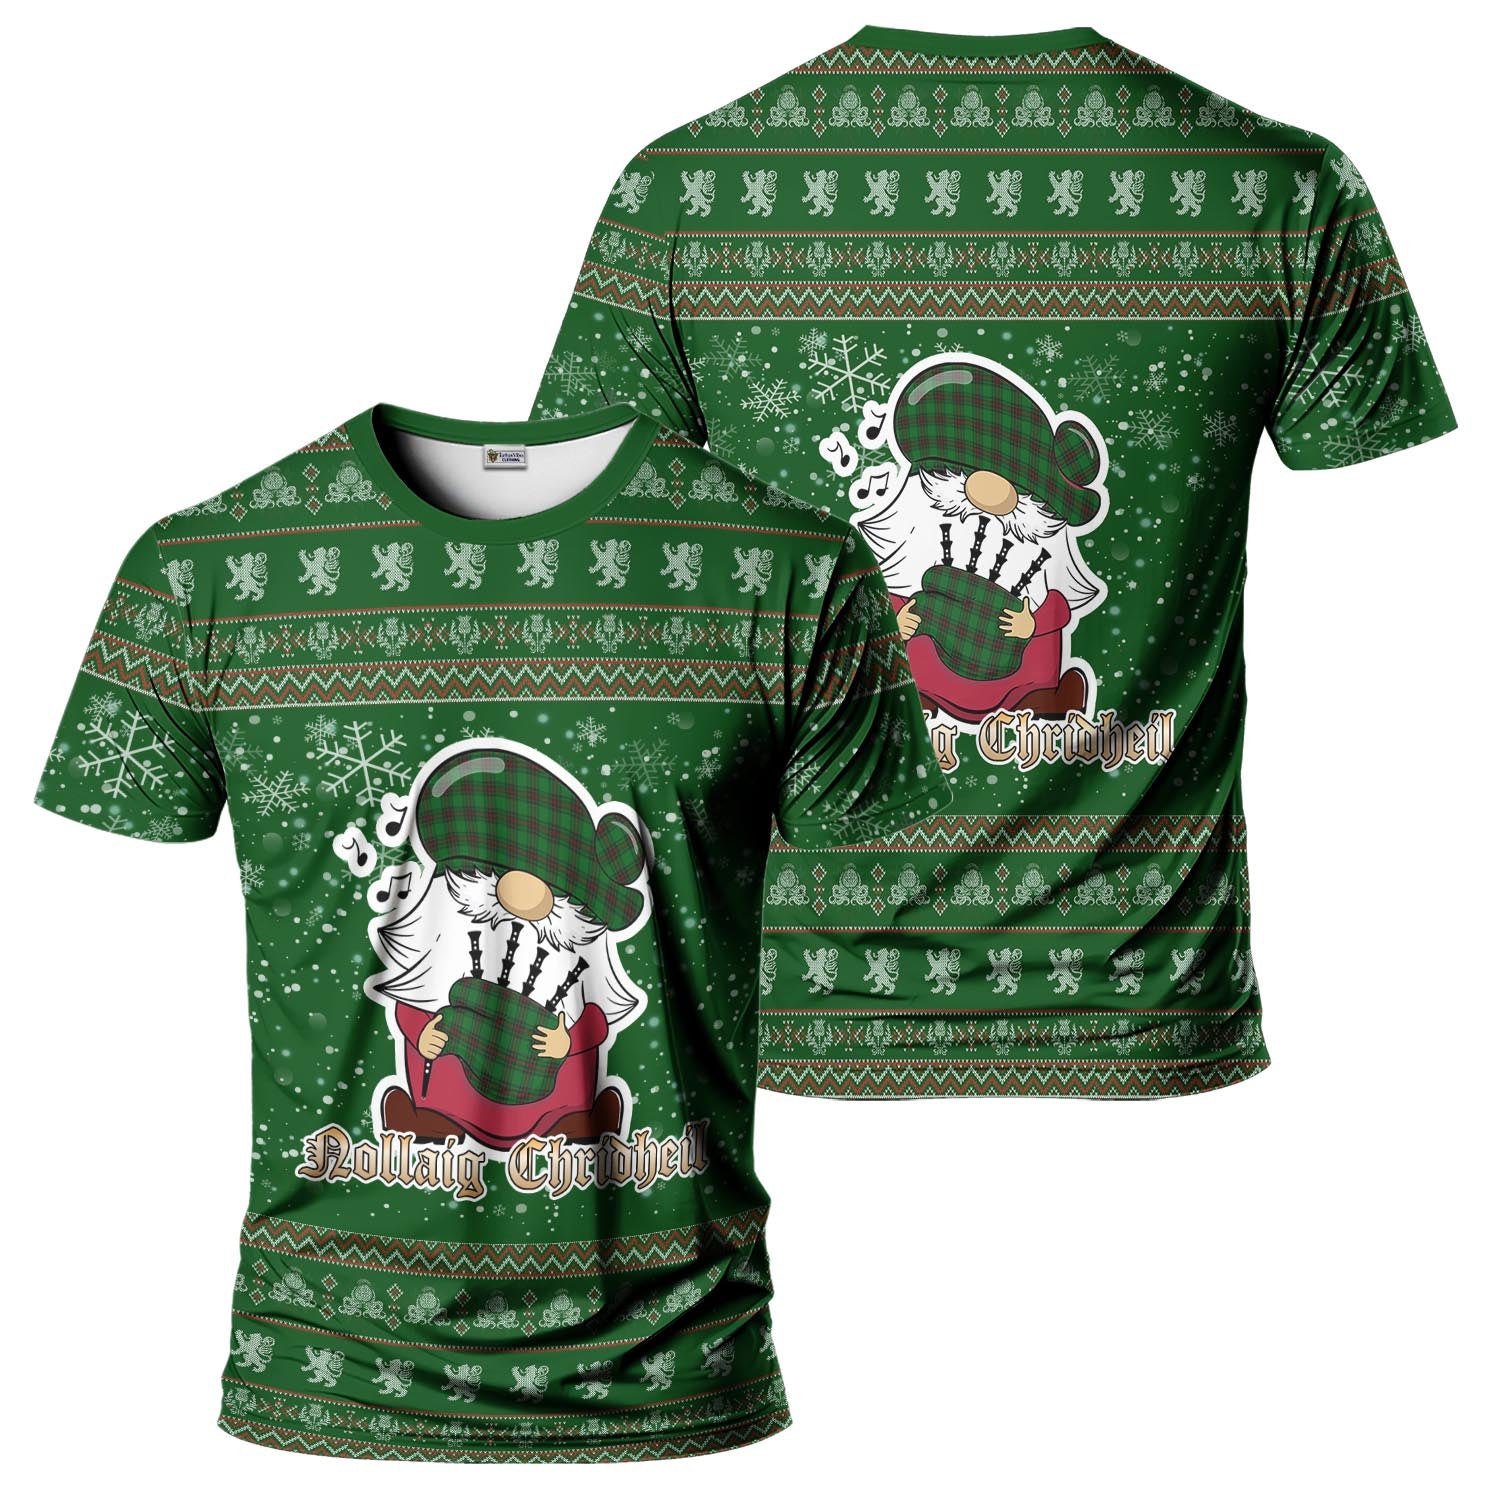 Halkerston Clan Christmas Family T-Shirt with Funny Gnome Playing Bagpipes Men's Shirt Green - Tartanvibesclothing